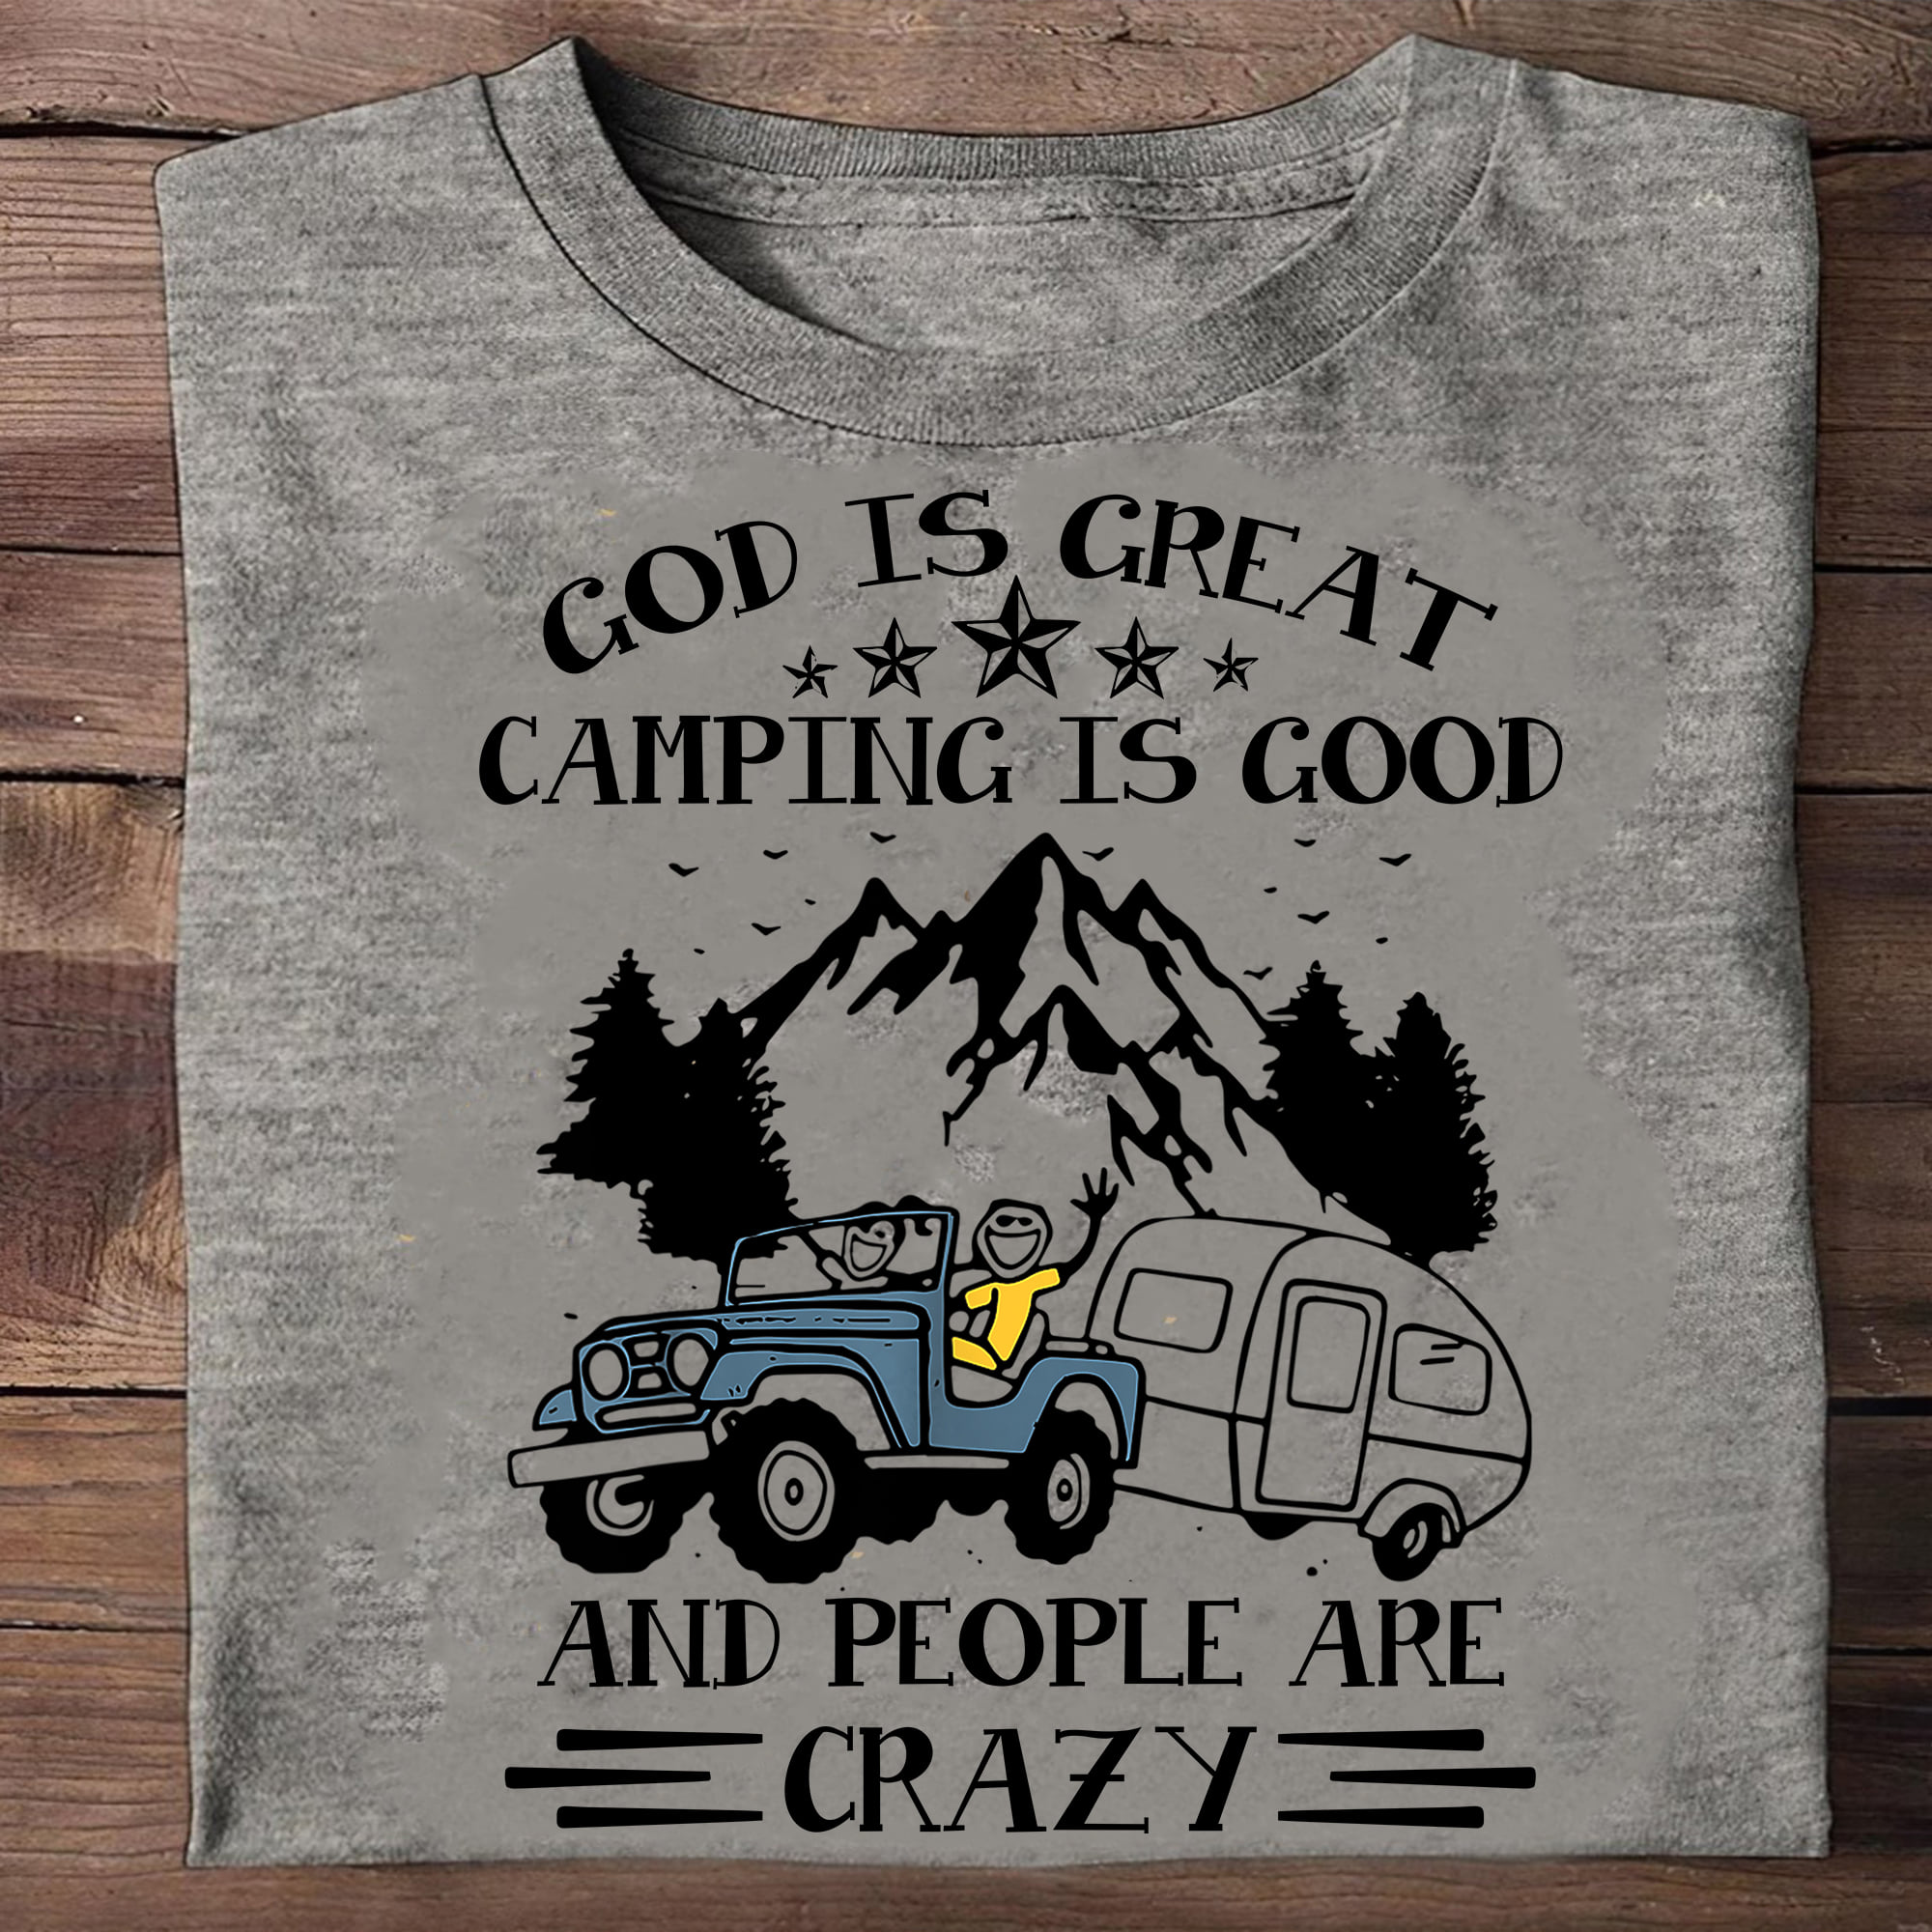 God is great camping is good and people are crazy